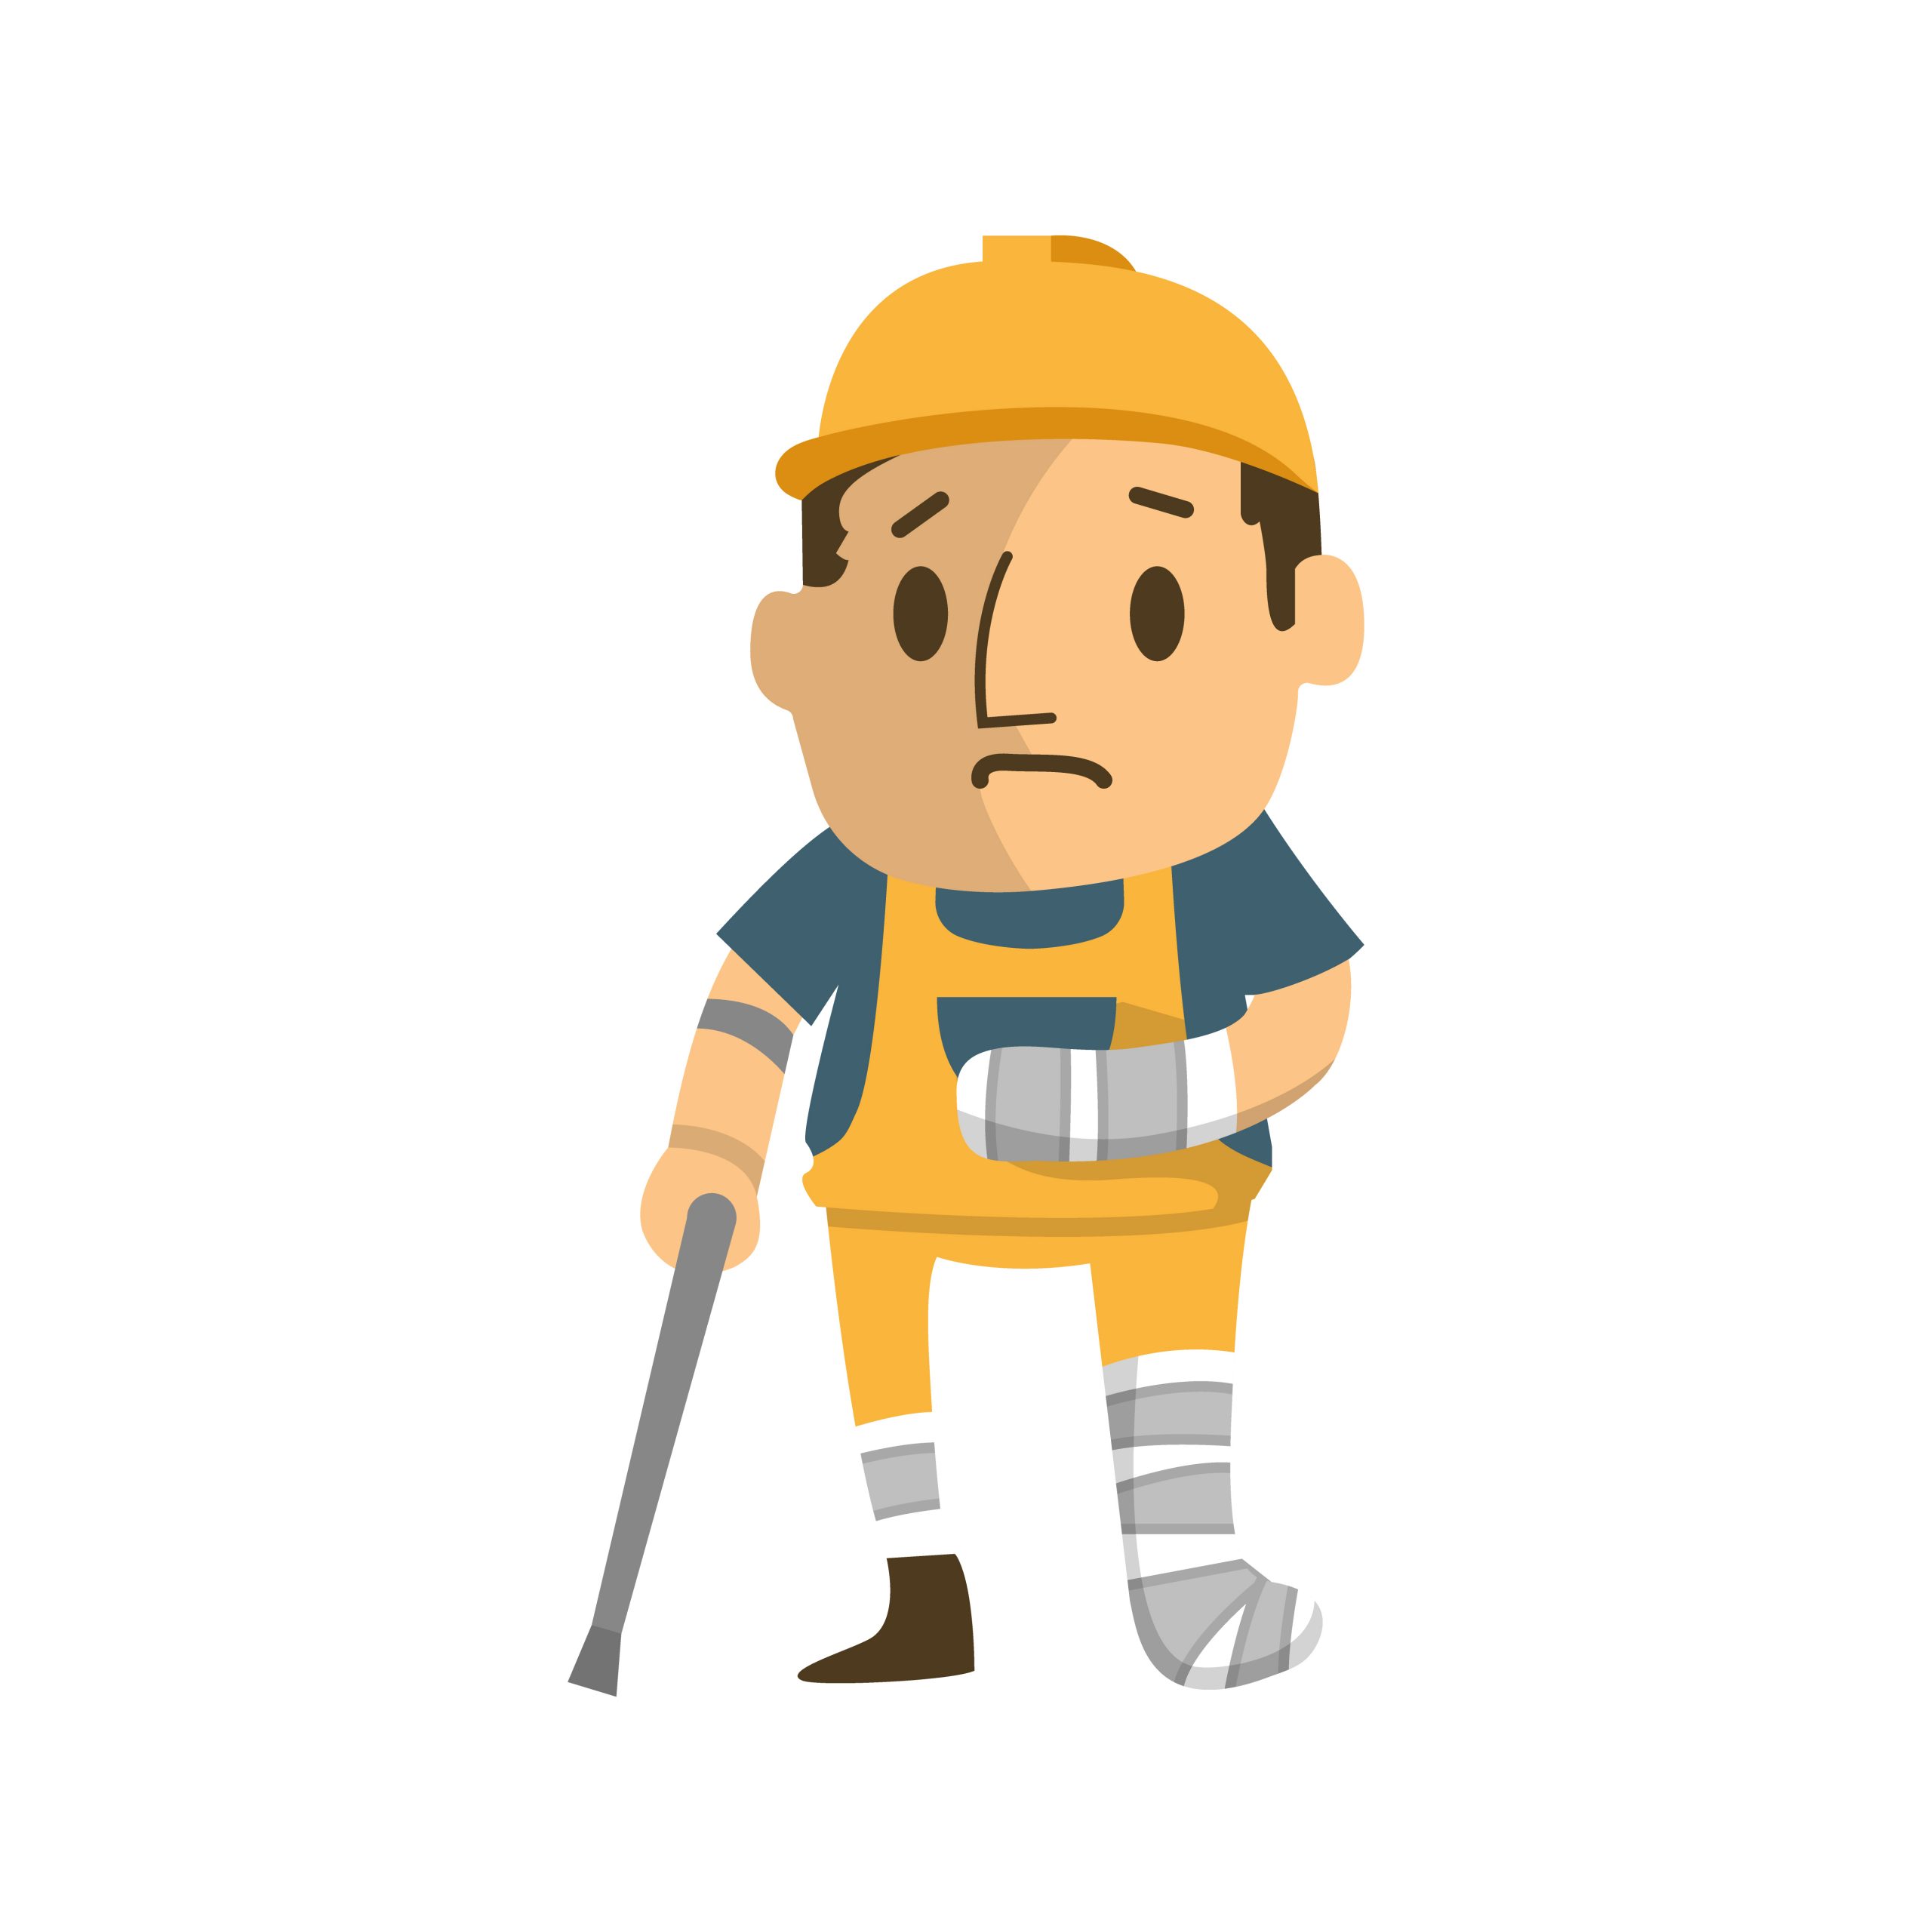 What Workers' Compensation Rights Do You Have After a Work Accident?